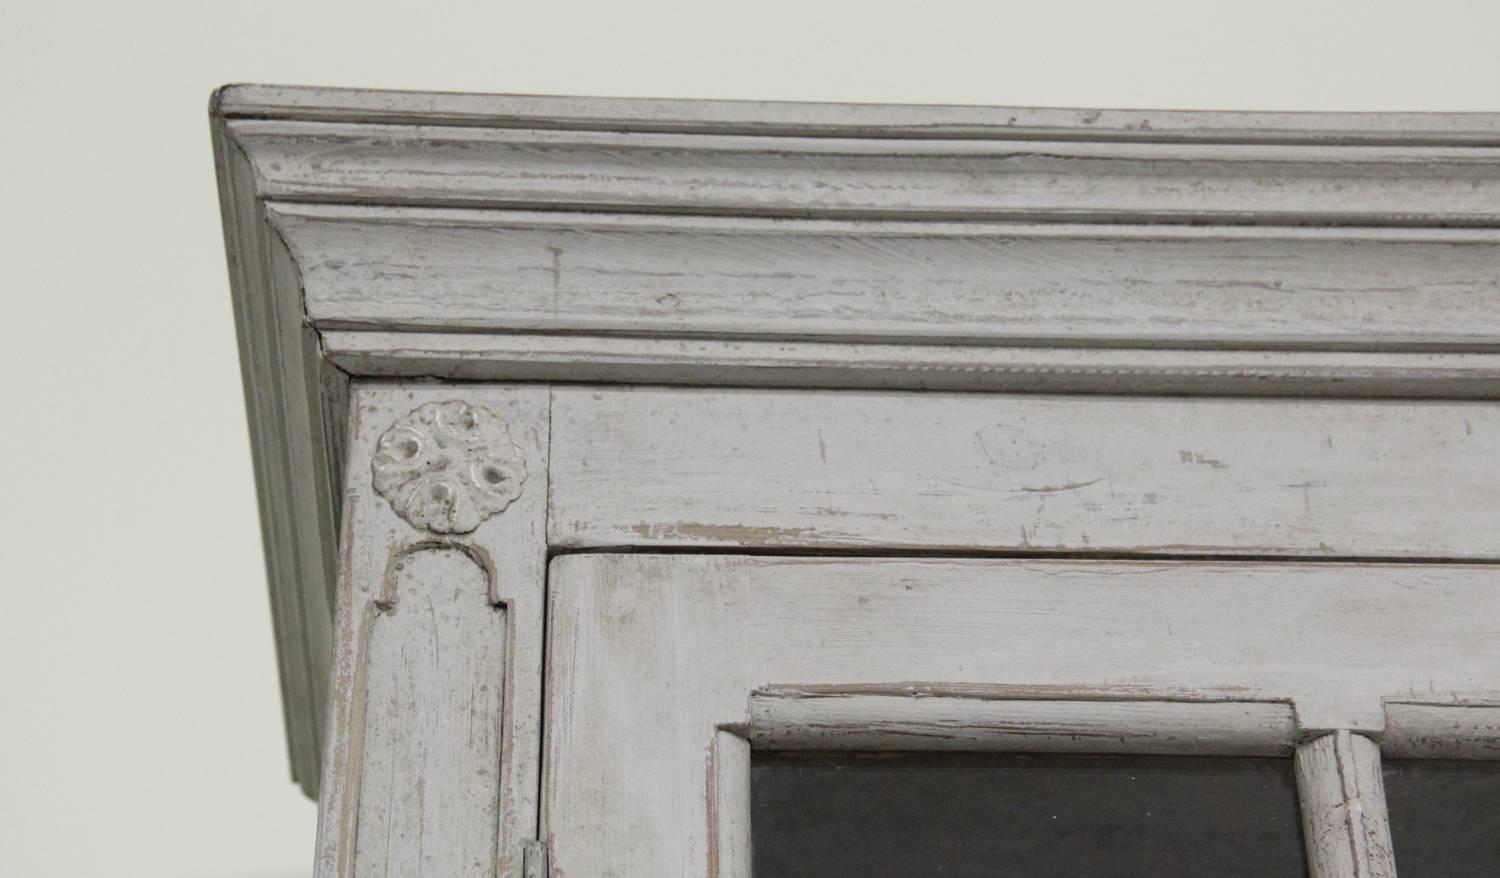 A Swedish late Gustavian four-door painted vitrine cabinet from the 19th century. This classically designed piece is made in two parts. The upper section features three shelves behind original glass doors. The top of the lower section is framed by